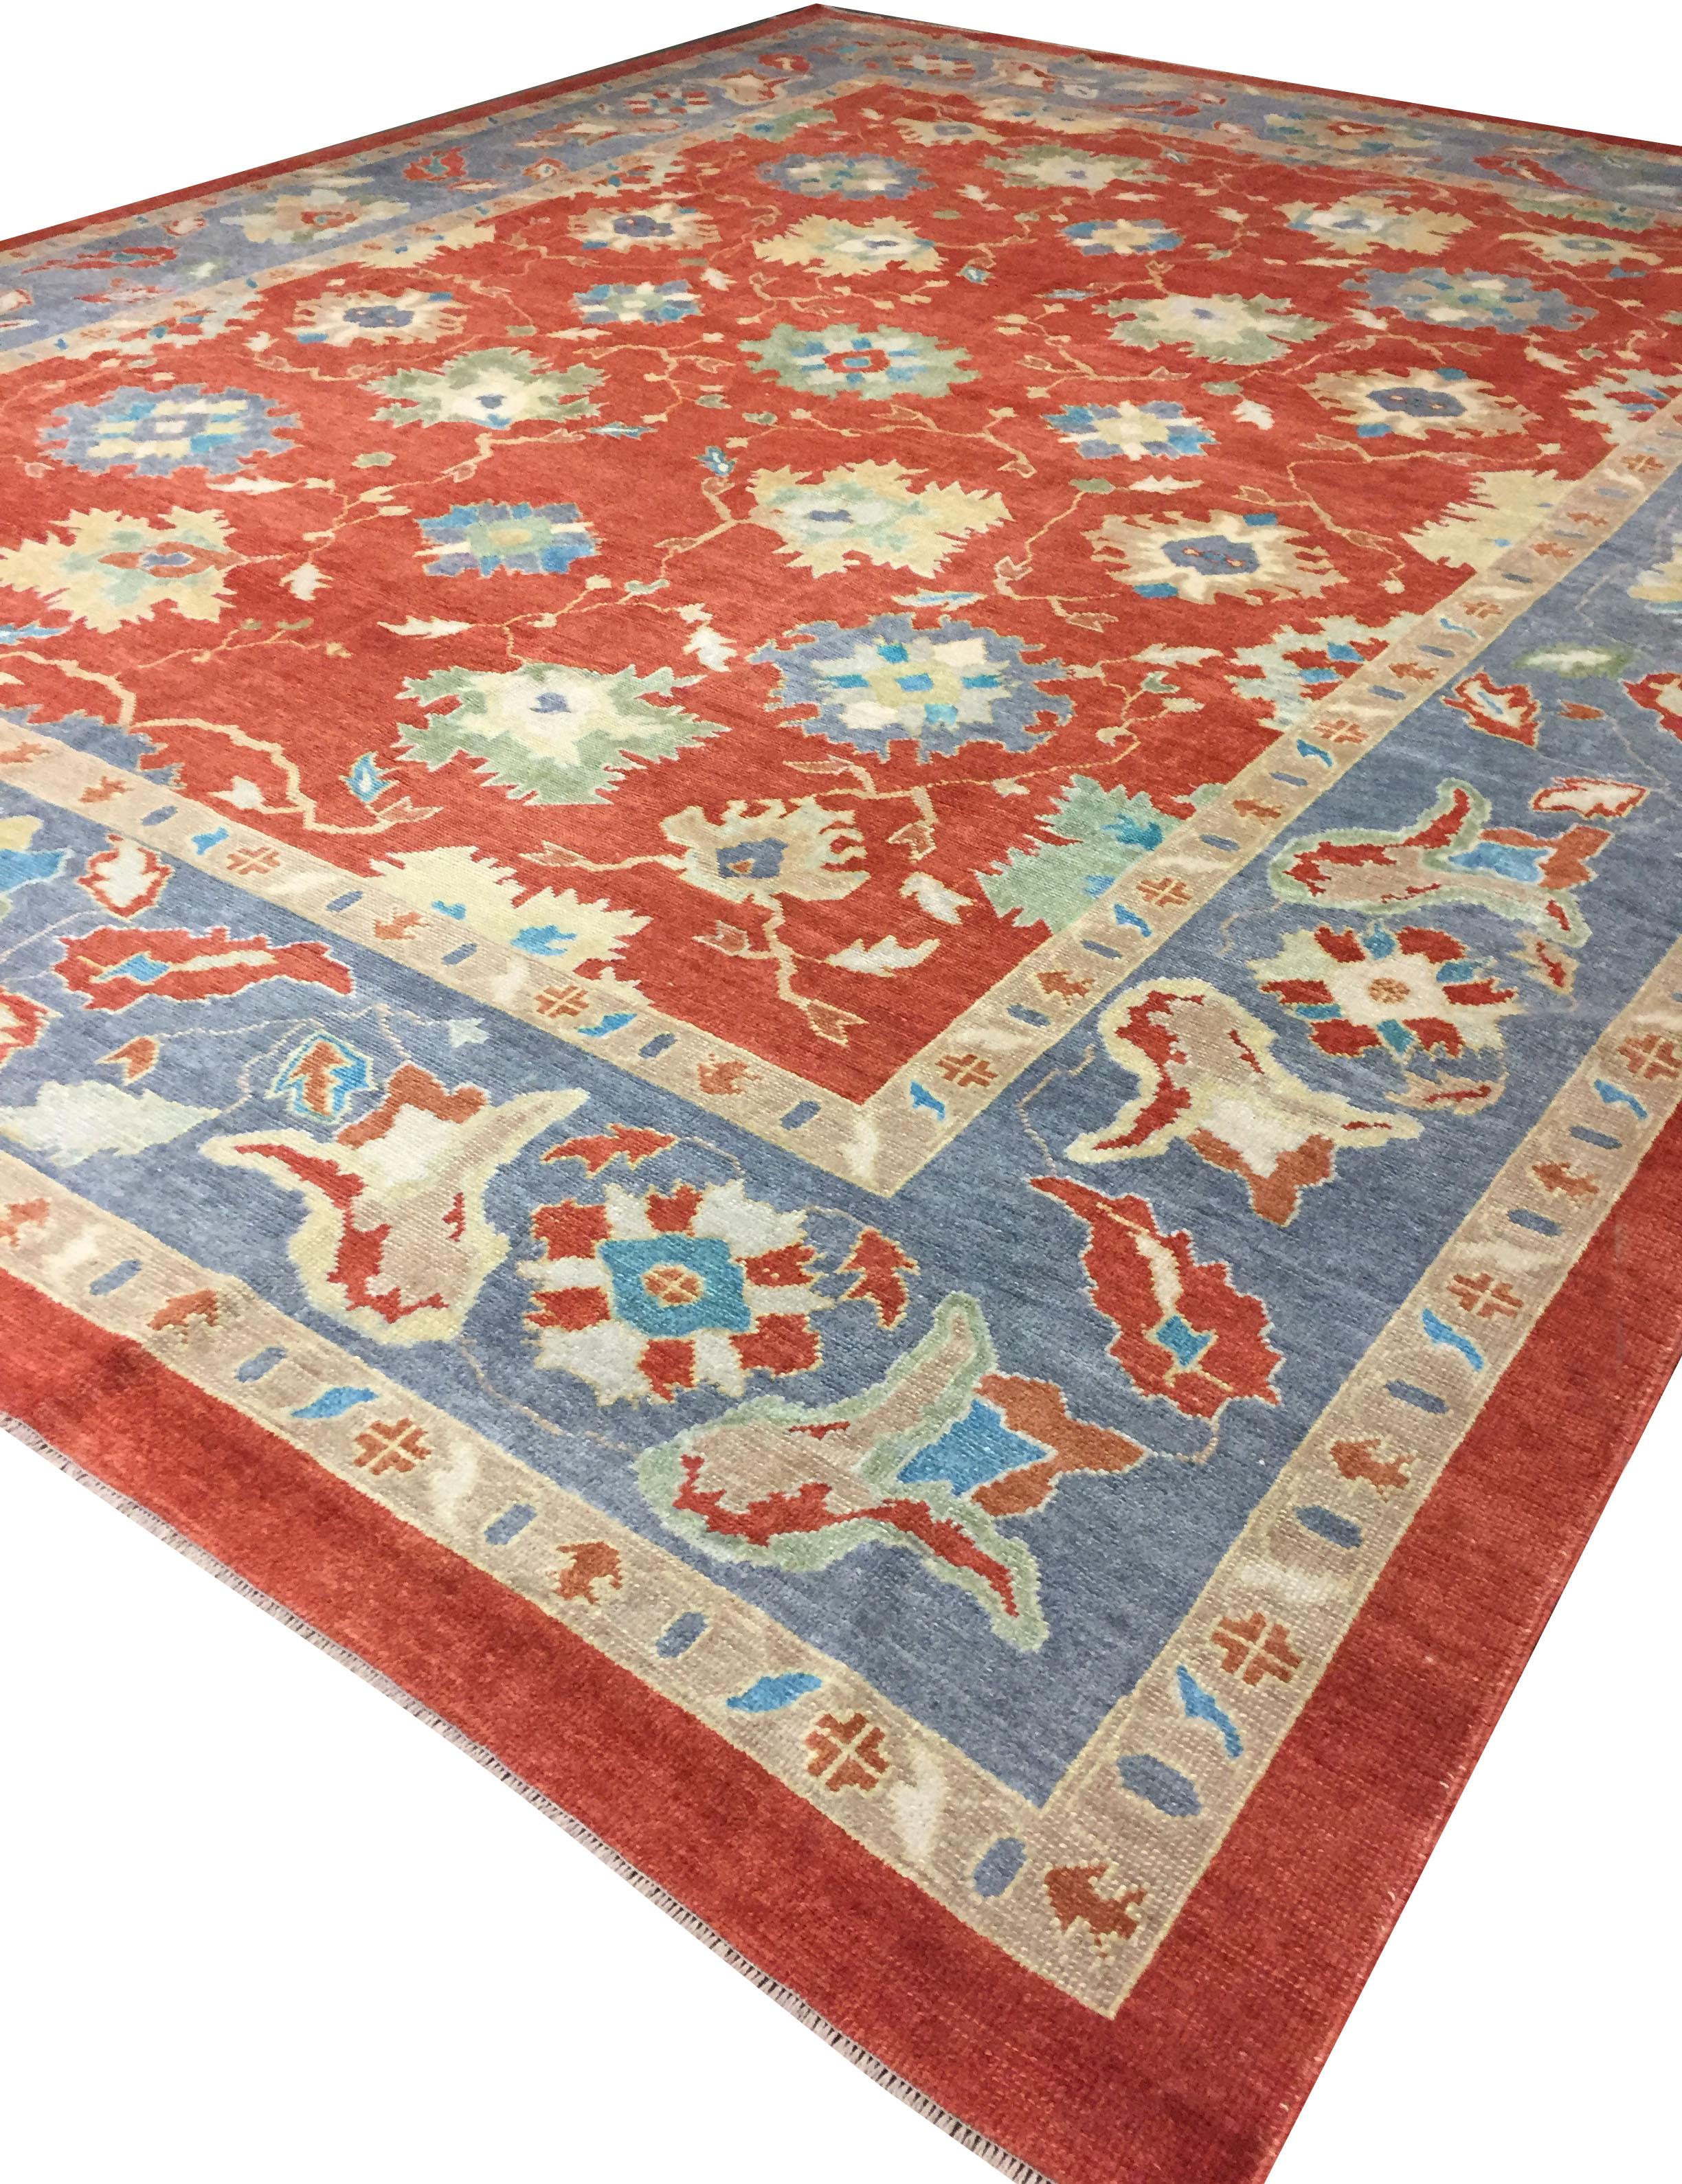 Hand-Woven Turkish Oushak Rug, 12'10 x 16'1 For Sale